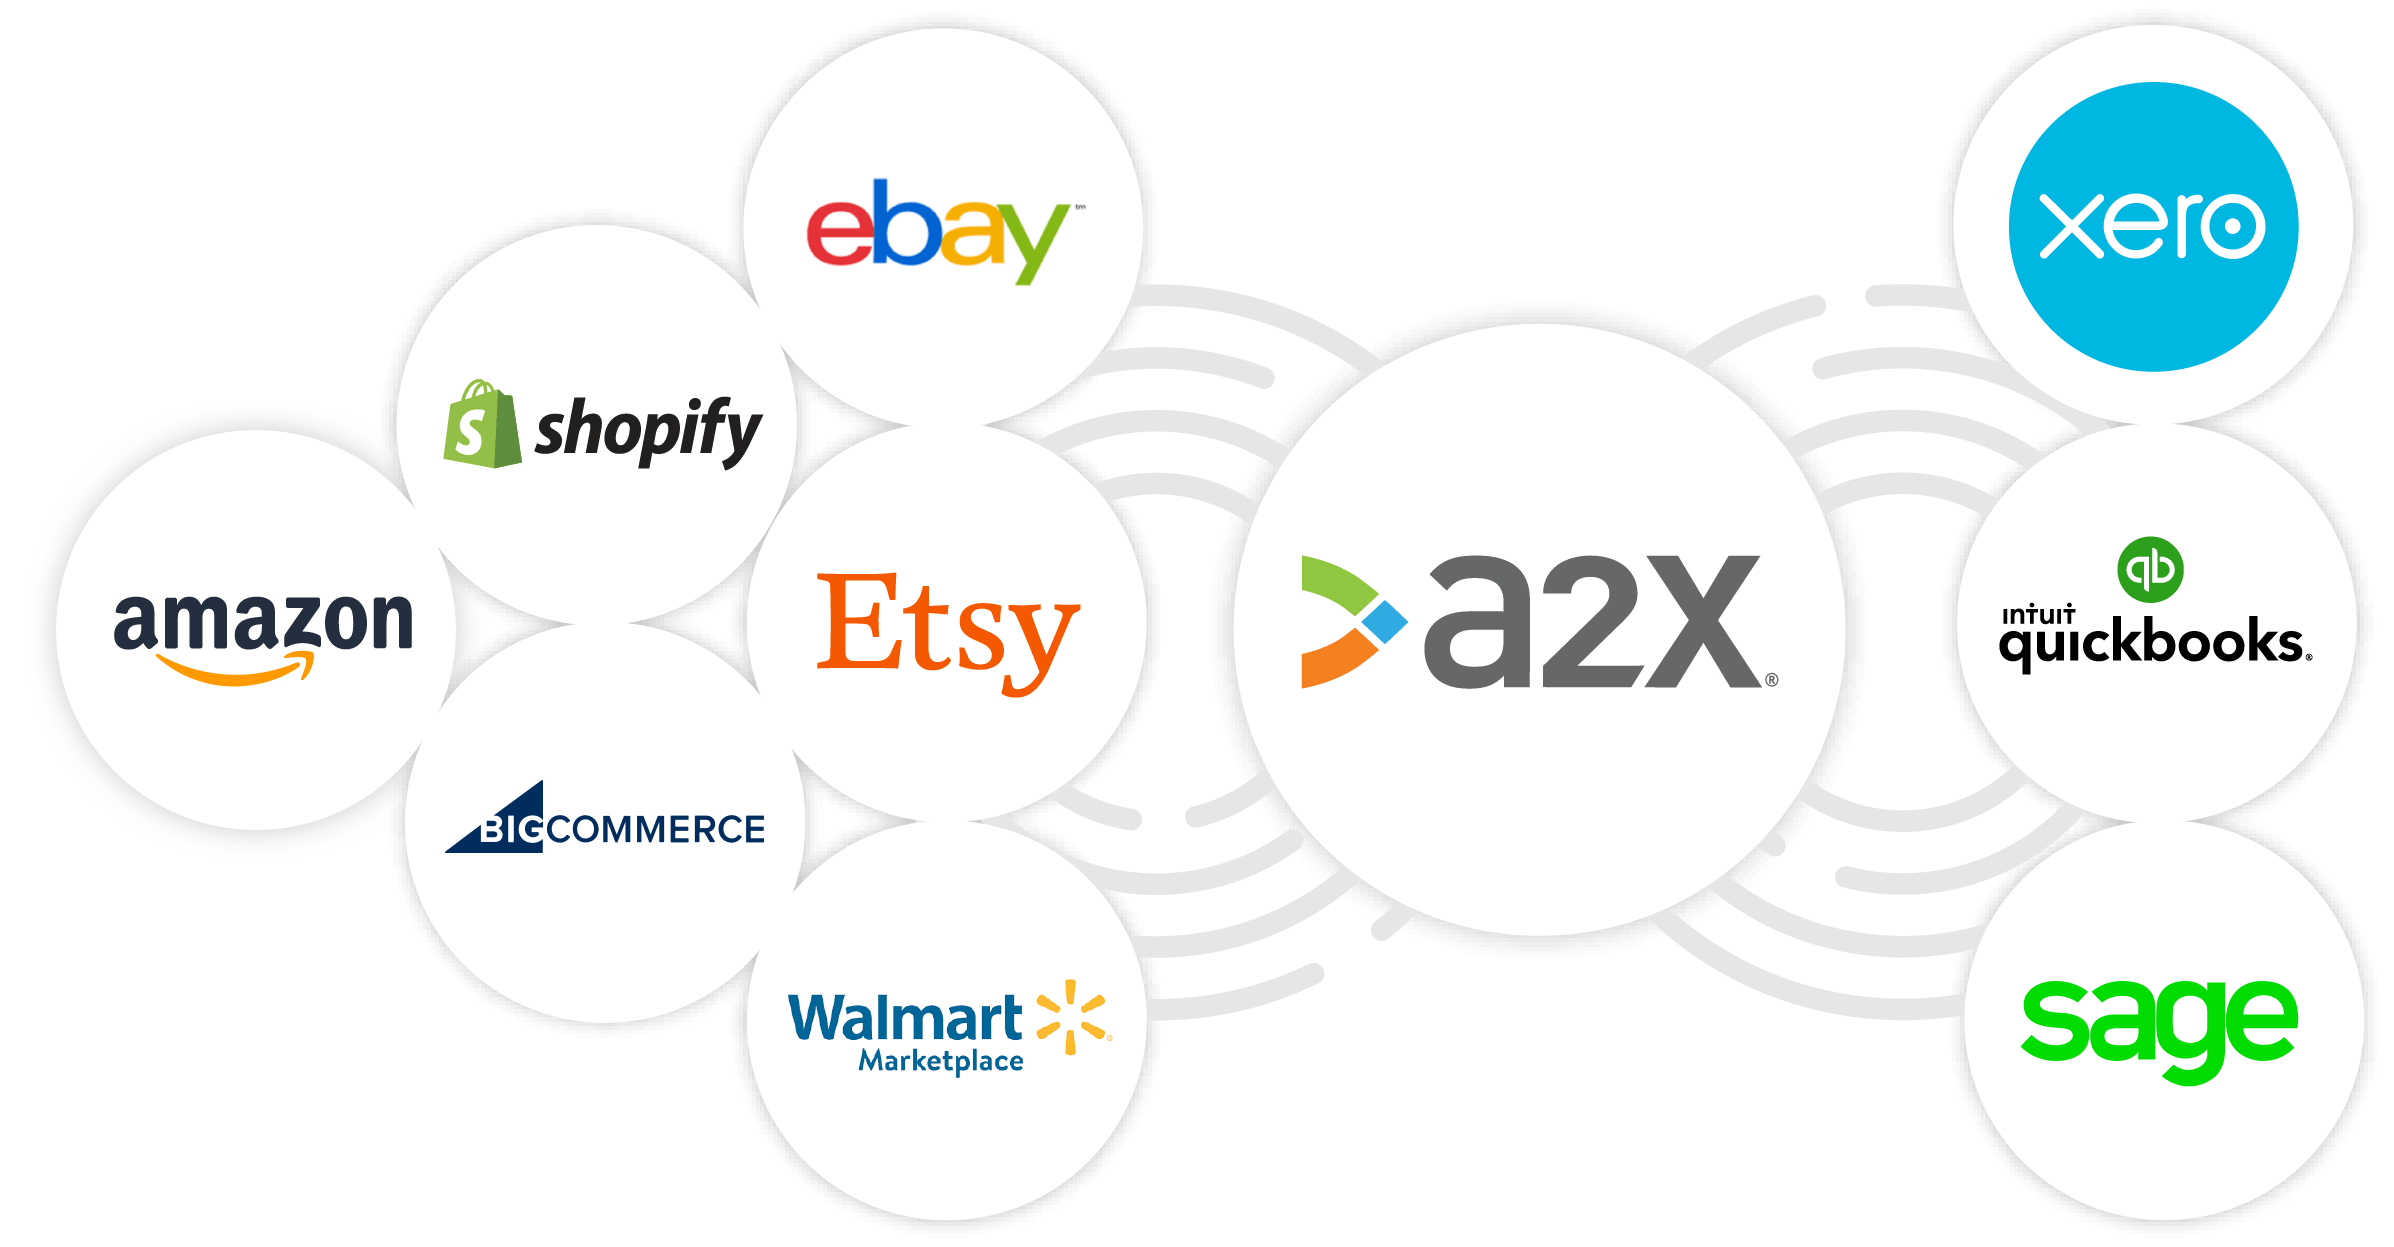 A graphic showing how A2X integrates with ecommerce platforms and passes on data to Xero, QuickBooks, or Sage